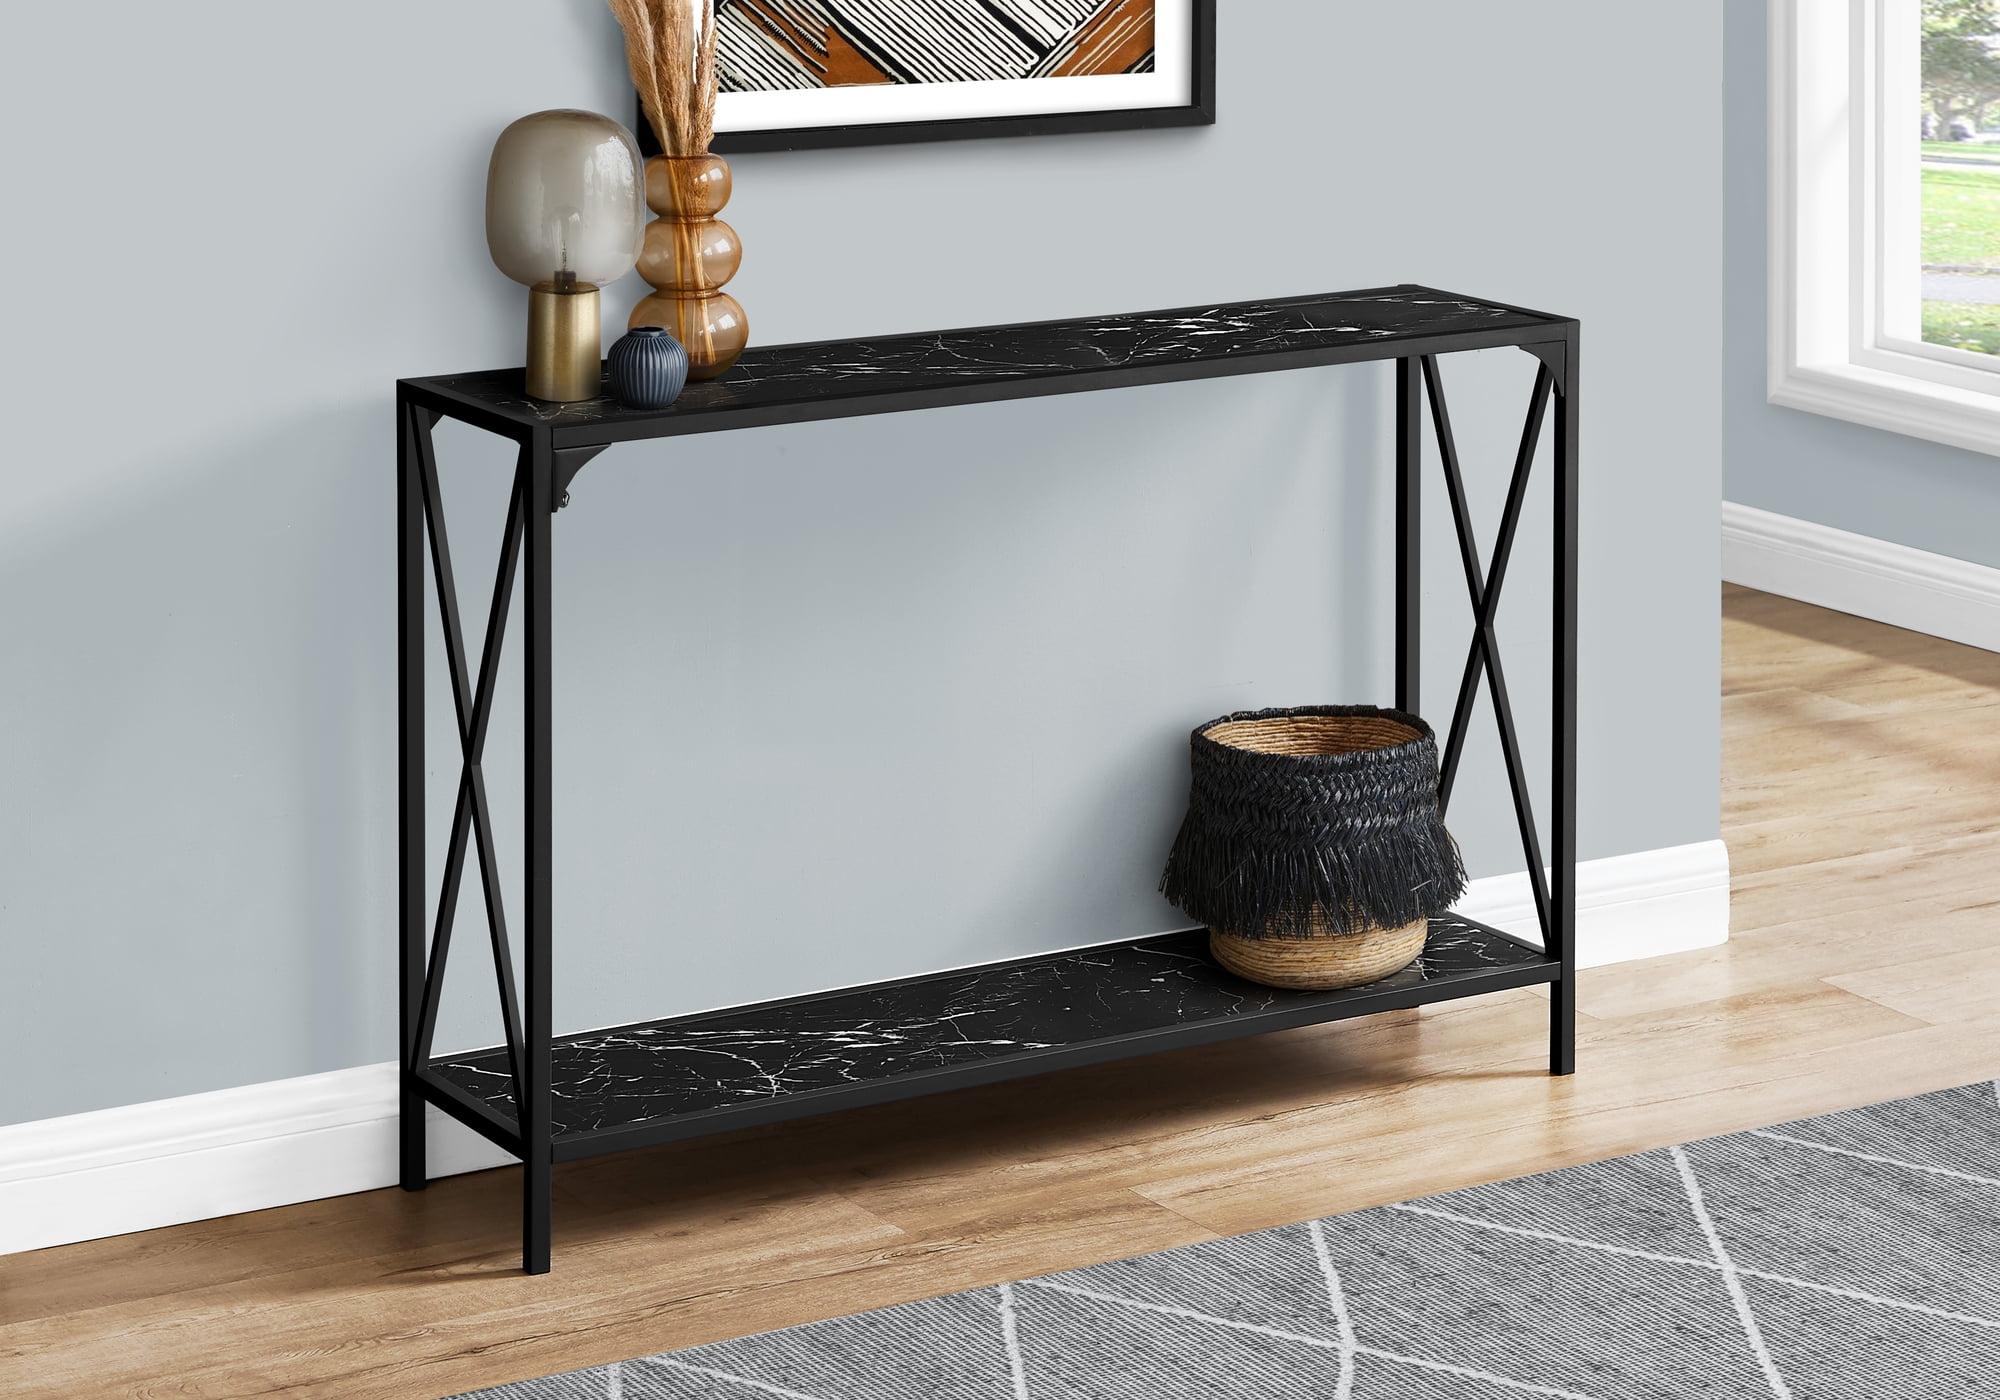 48" Black Faux Marble and Metal Rectangular Console Table with Storage